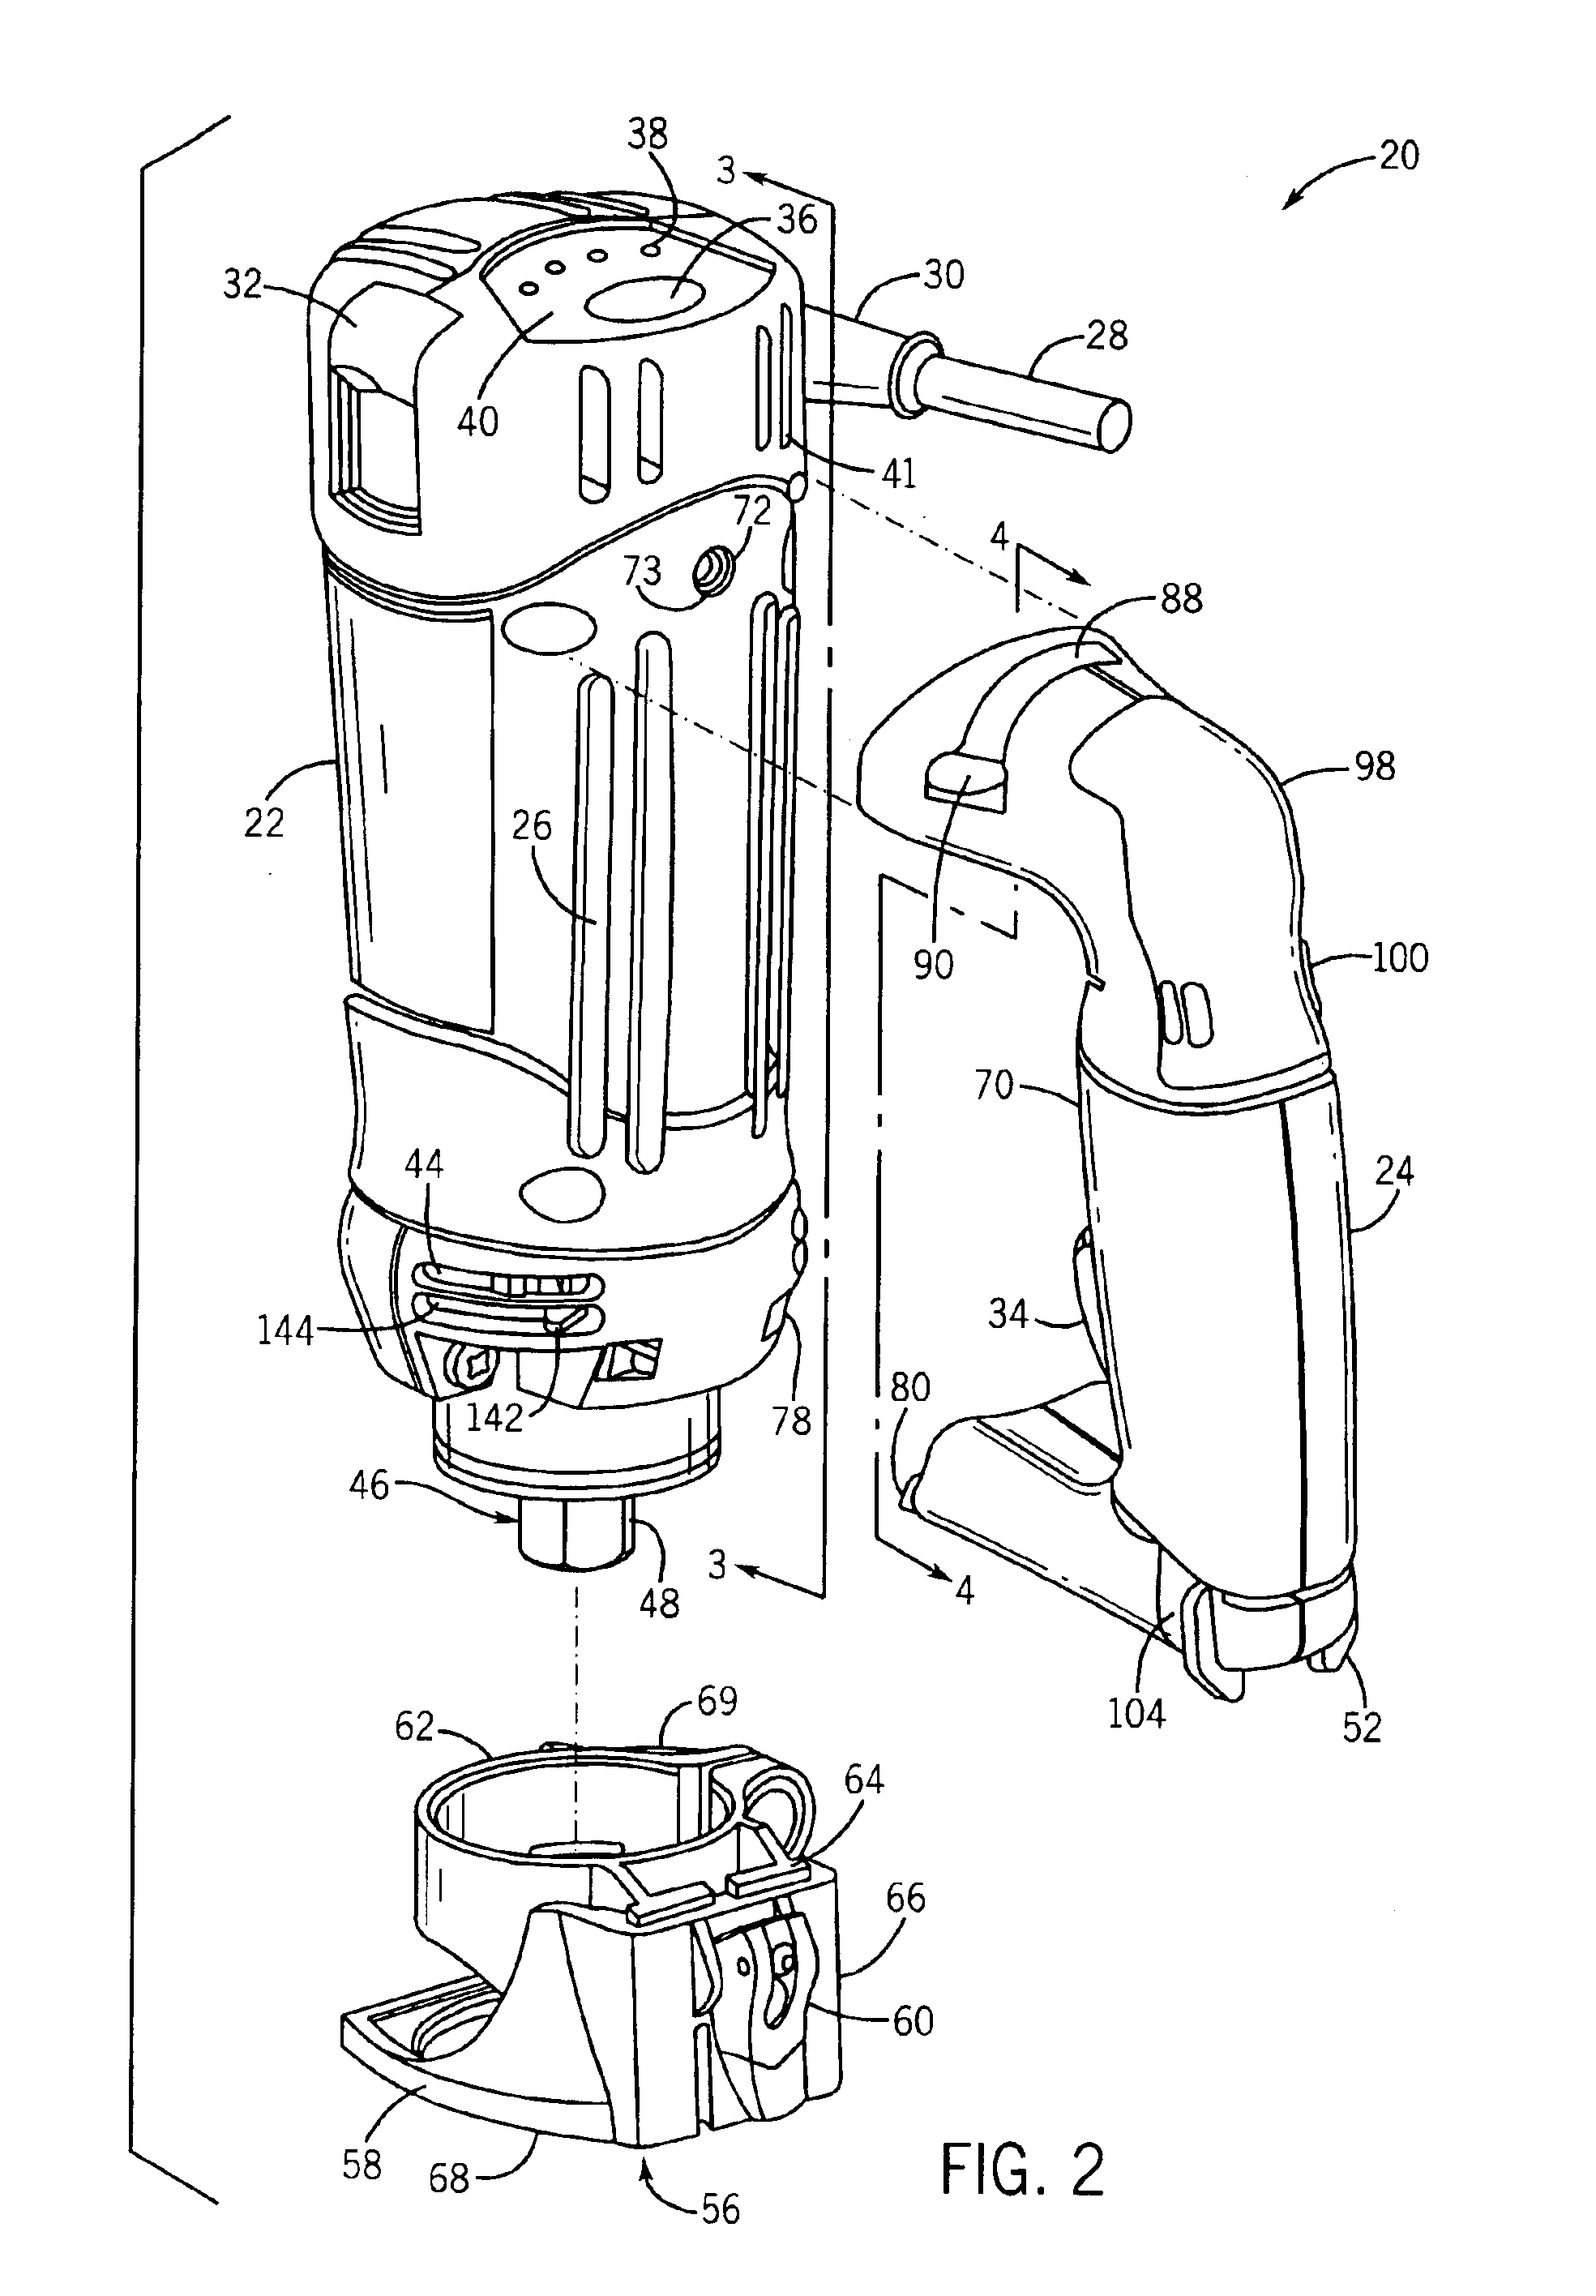 Power tool with light emitting diode